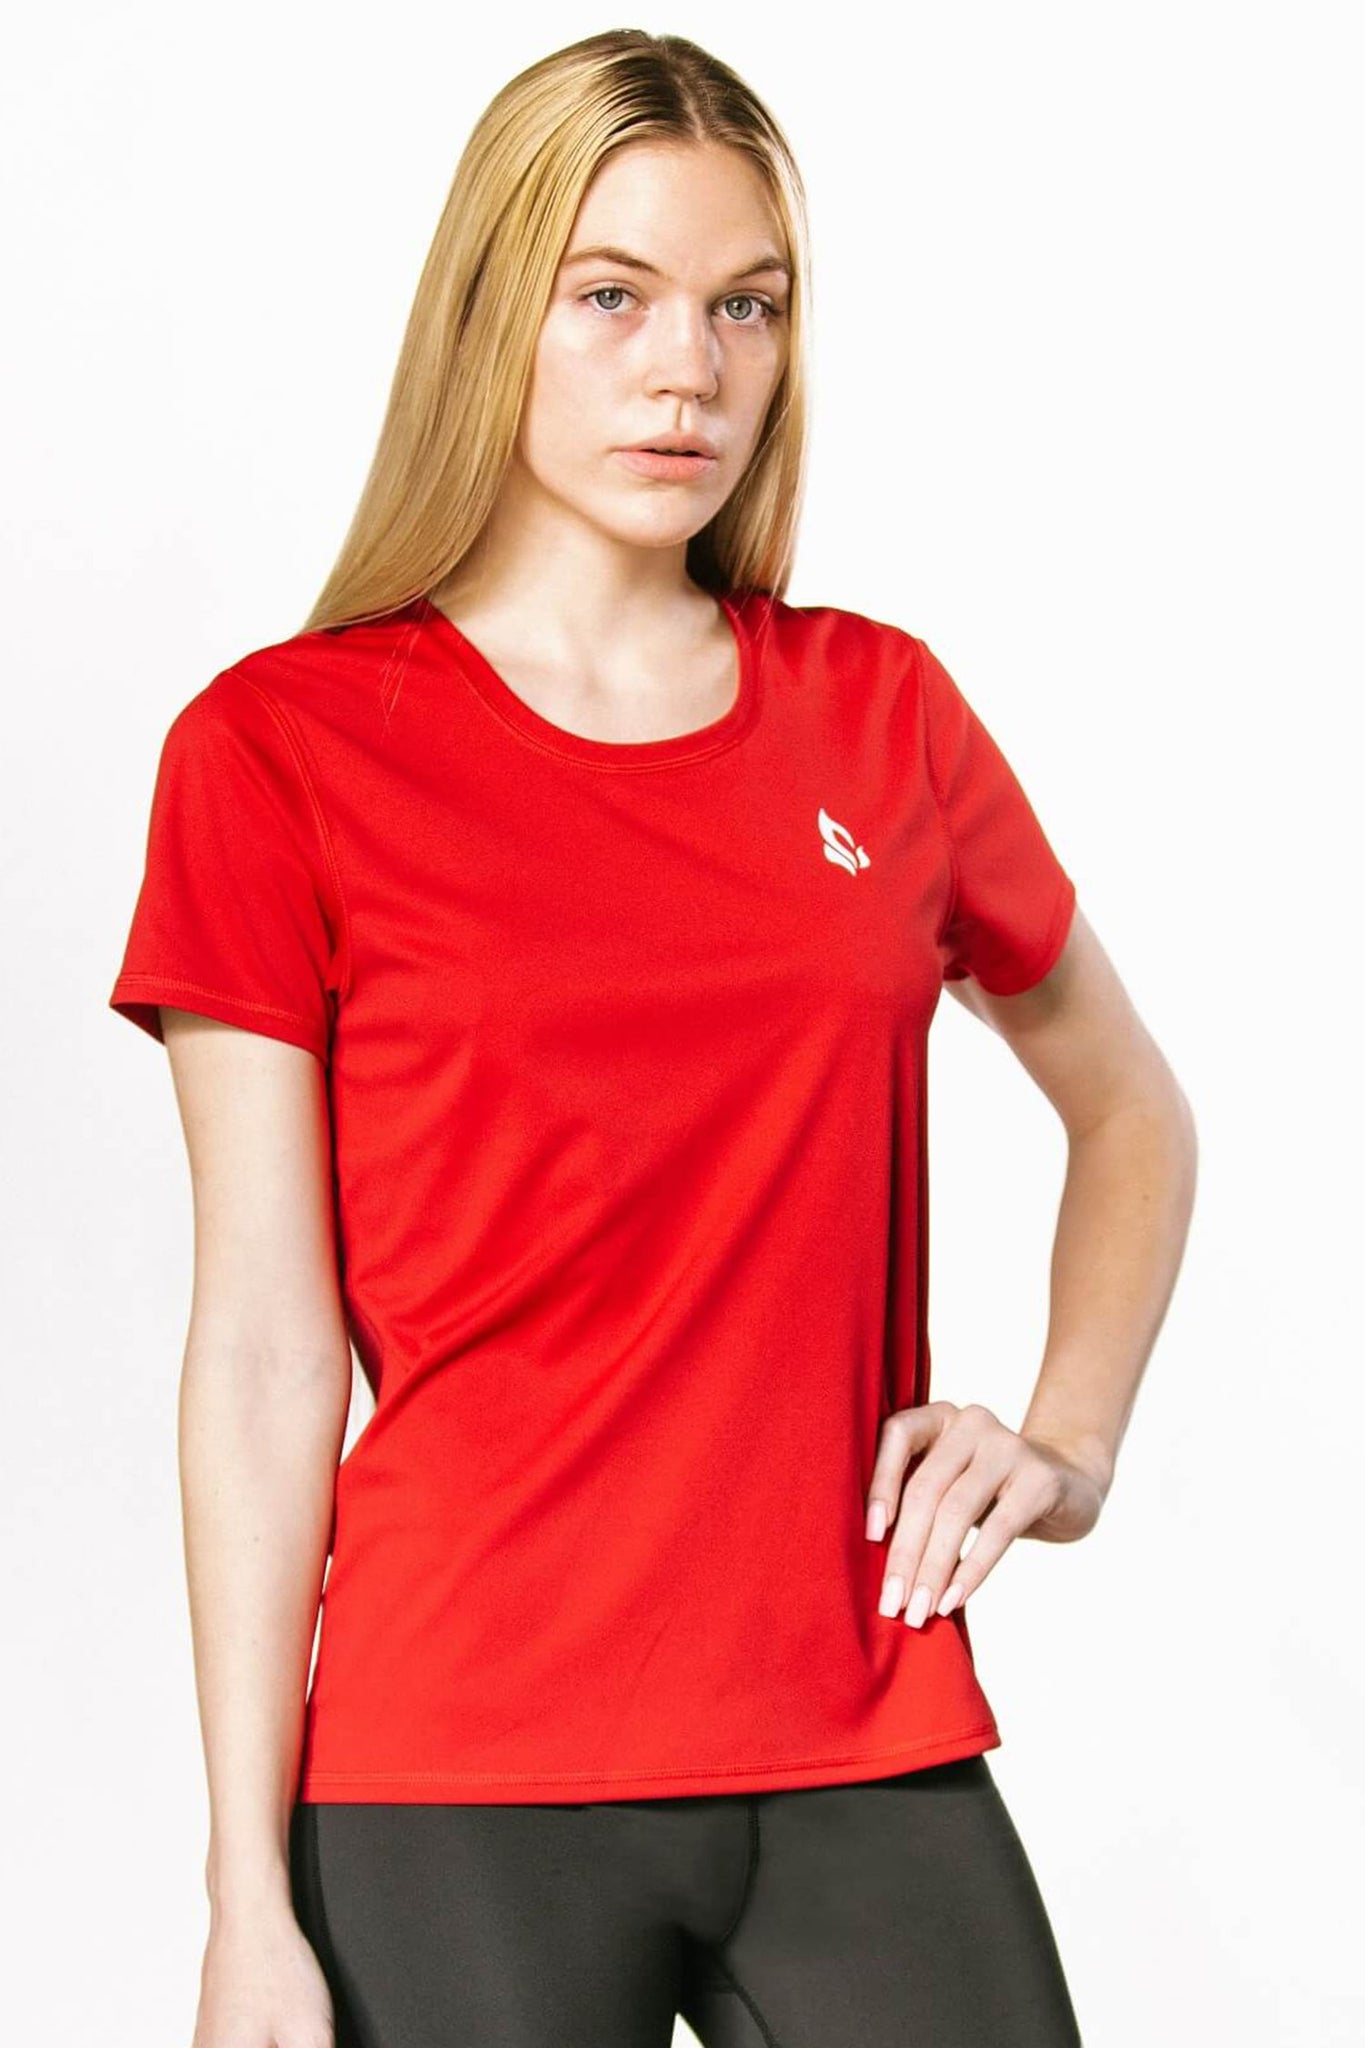 True Red Training Shirt Ethical Fashion Fitness Clothes Fair Trade